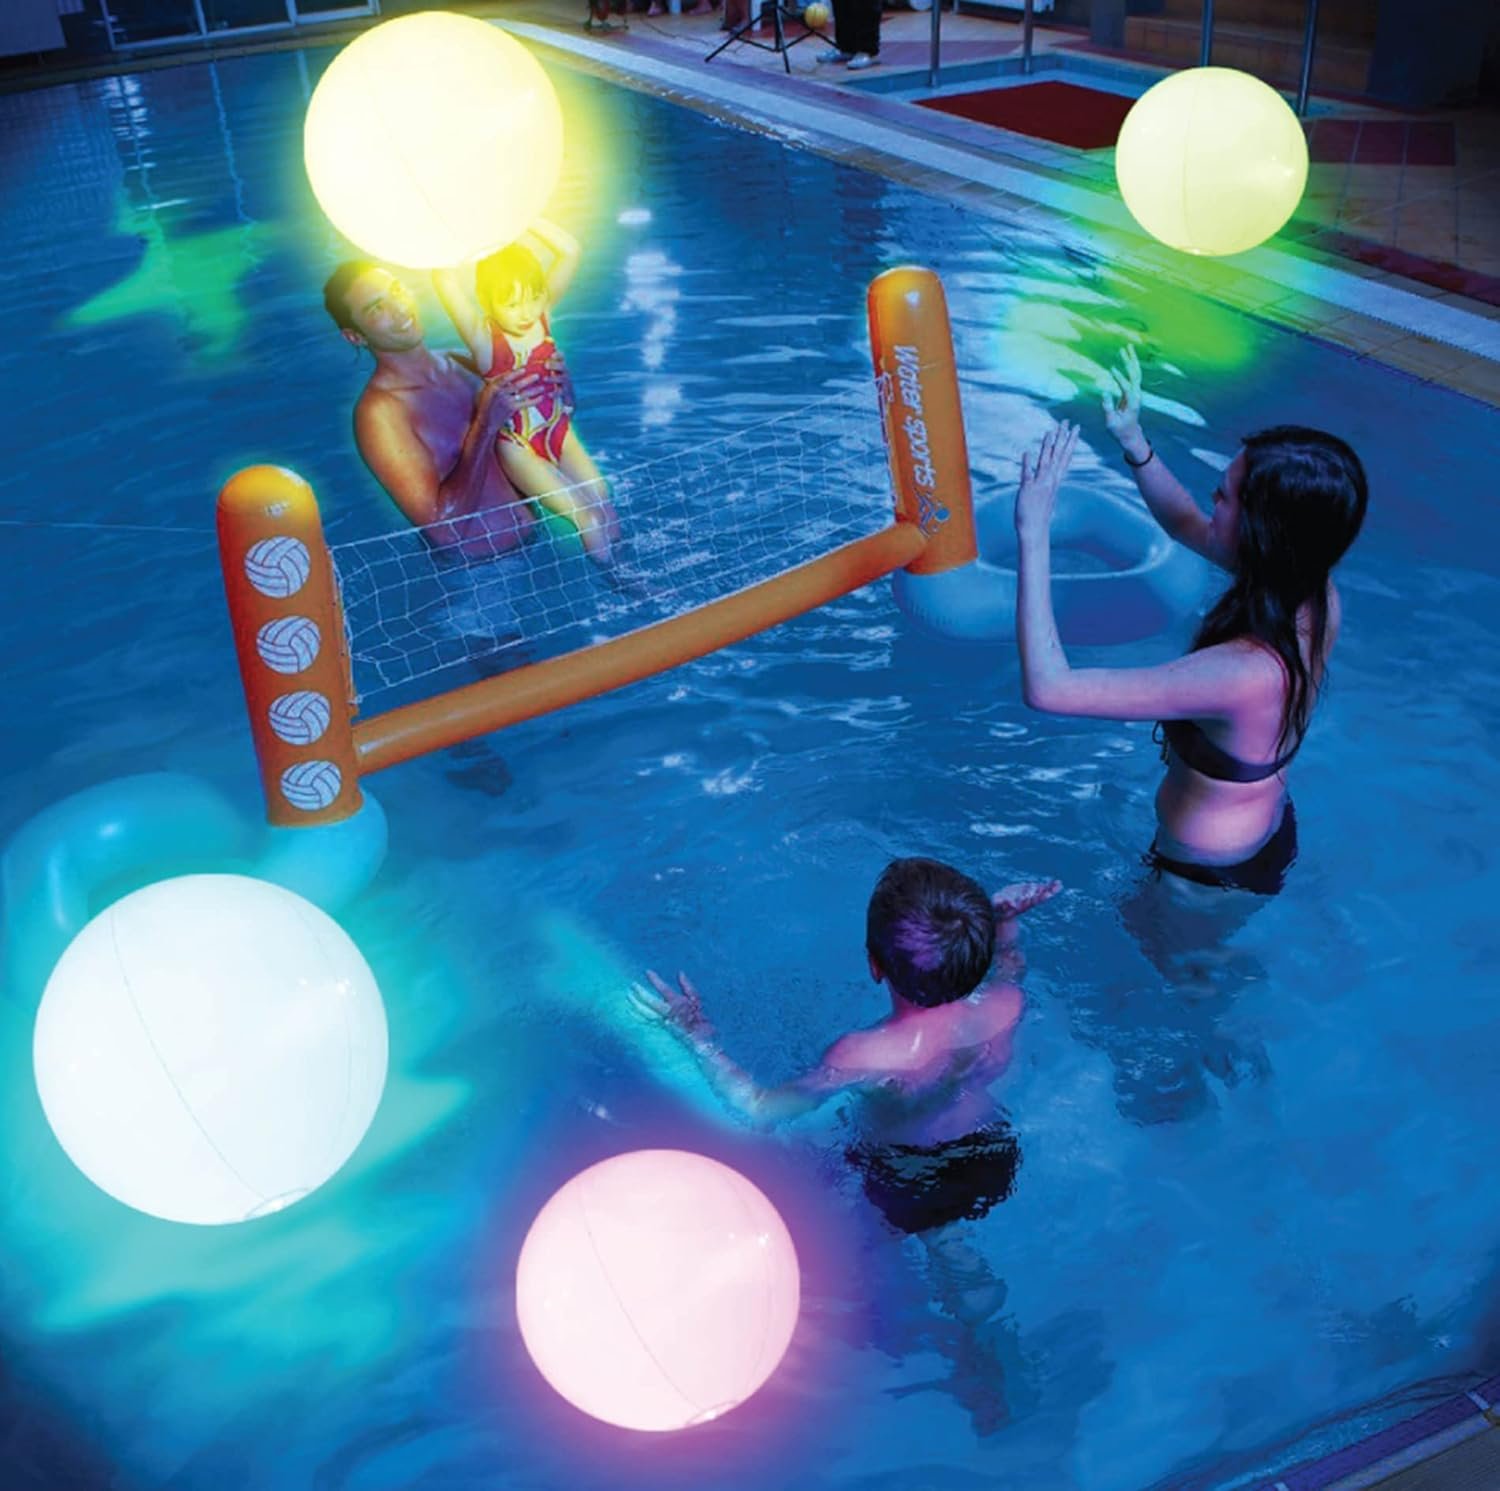 Pool Toys - 4 PACK Light Up Beach Balls for Kids w/ 8 Light Modes, Pool Beach Games Balls for Outdoor or Indoor Activities, Glow in The Dark Pool Beach Decorations for Kids and Adults